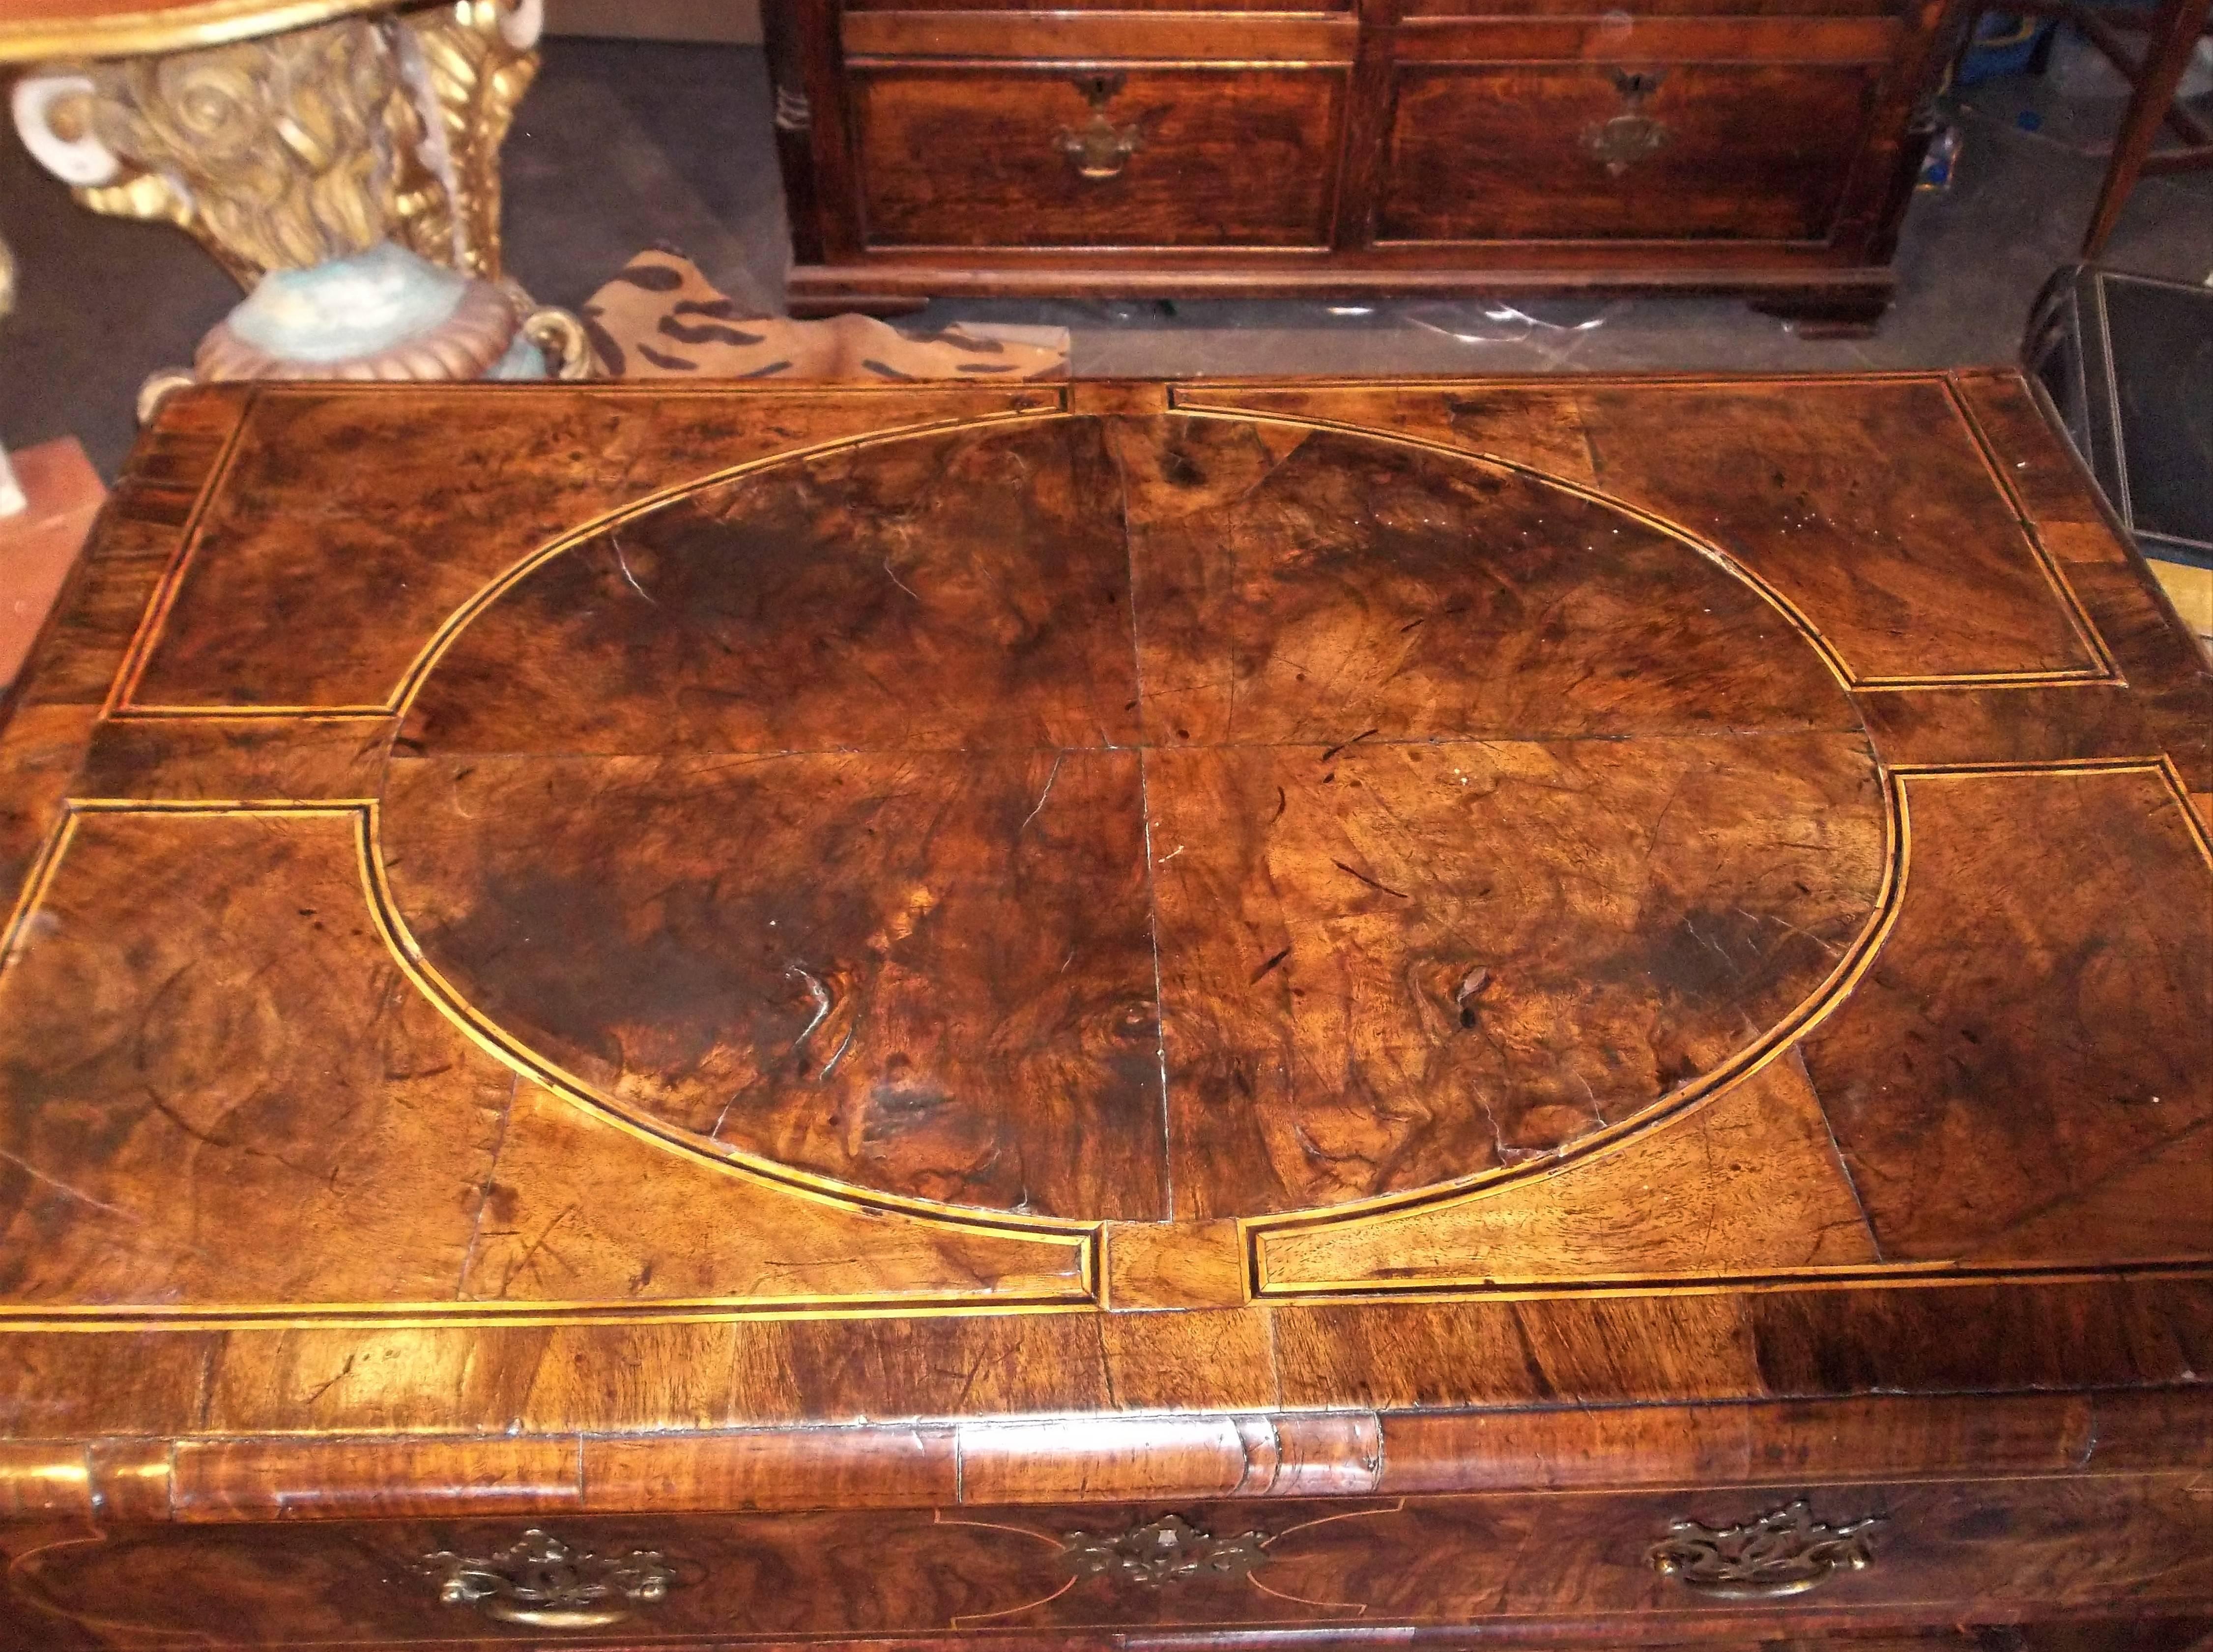 On bracket feet. The top and drawer fronts with string inlay. Heavily grained walnut burl veneers. Drawers with evidence of earlier pulls, current bat wings probably 19th century. Nice rich color overall. Fine patina. Thick chunky hand-carved